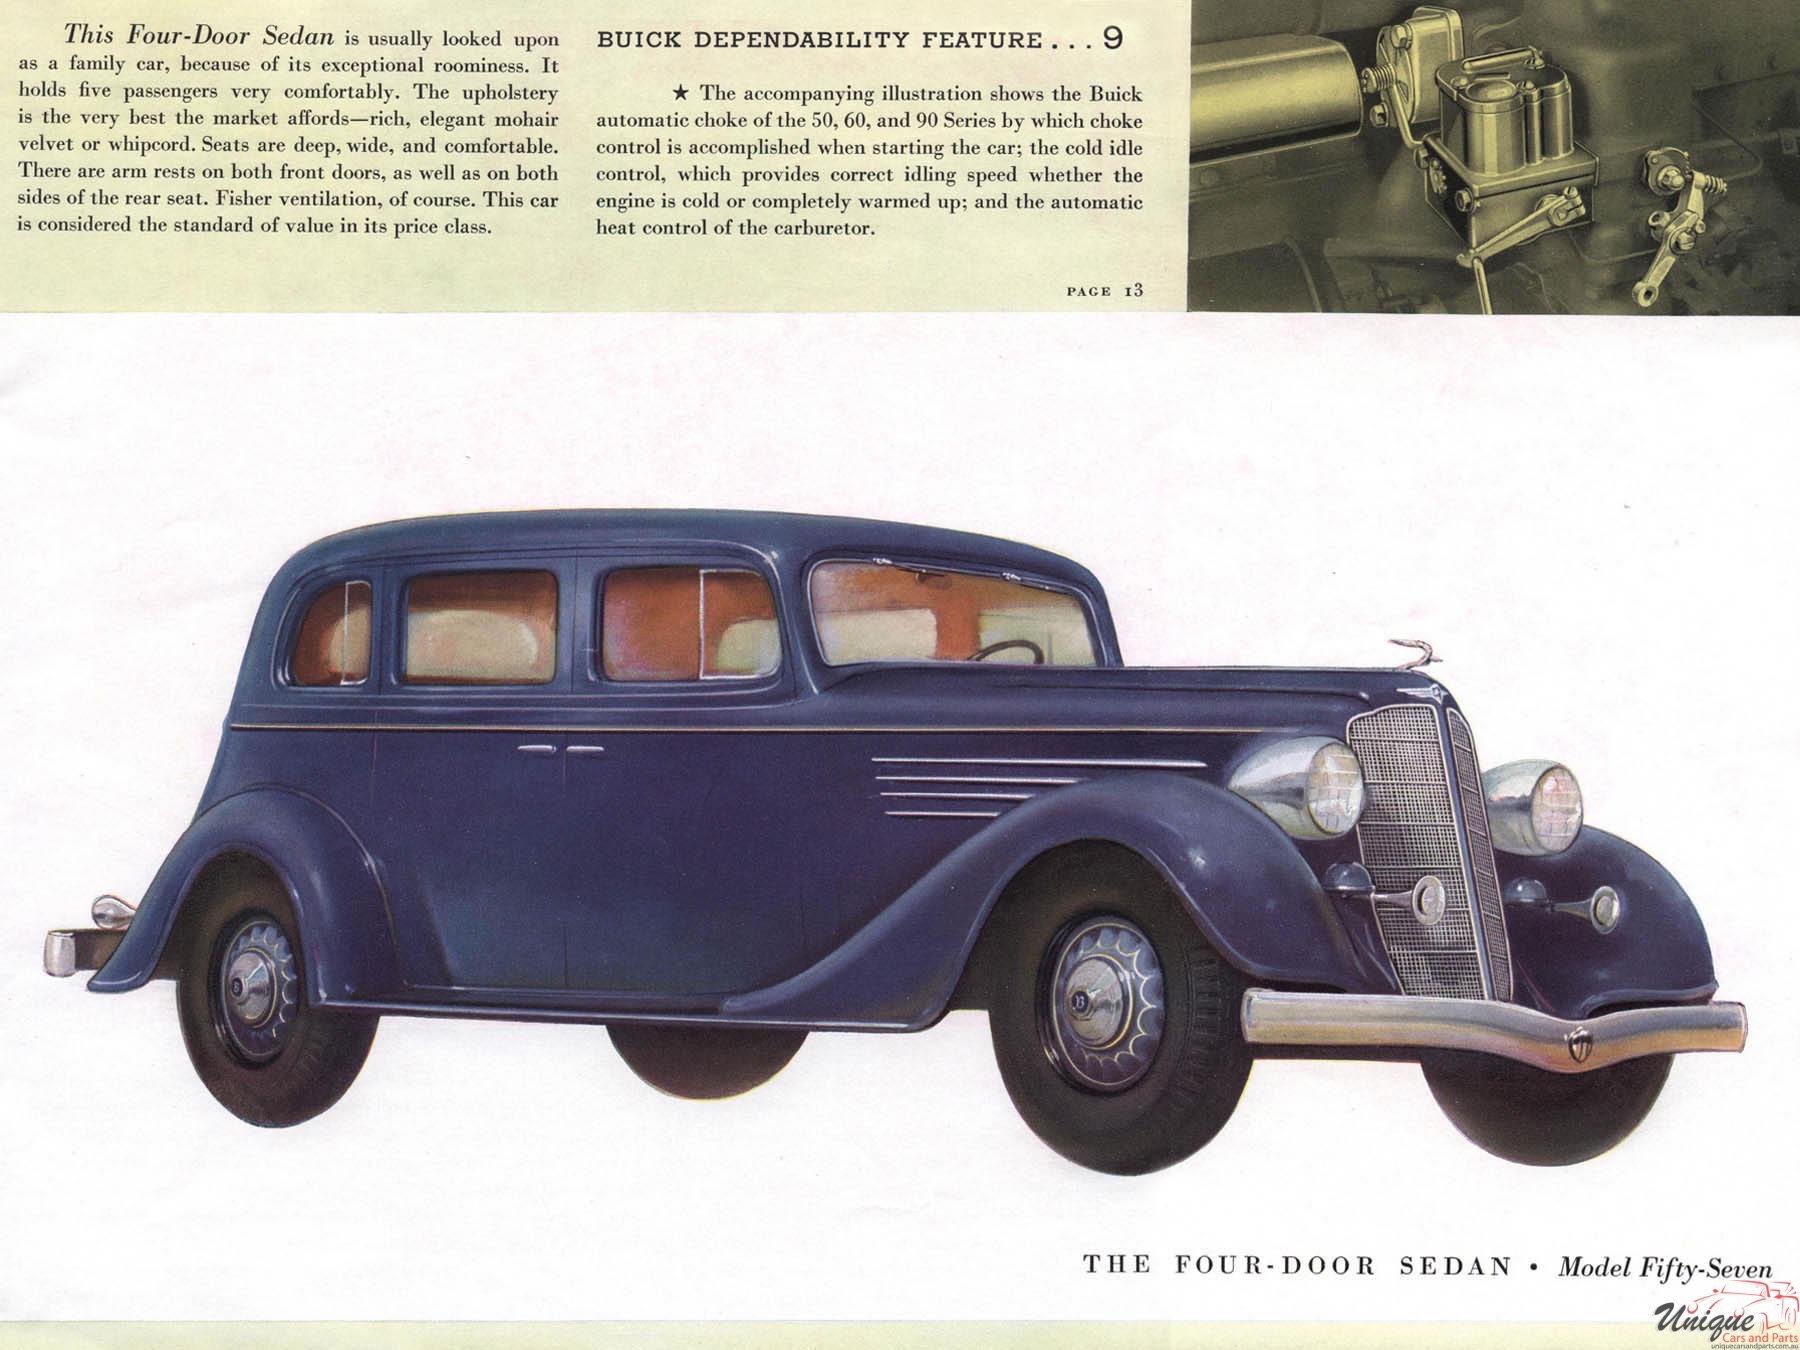 1935 Buick Brochure Page 27